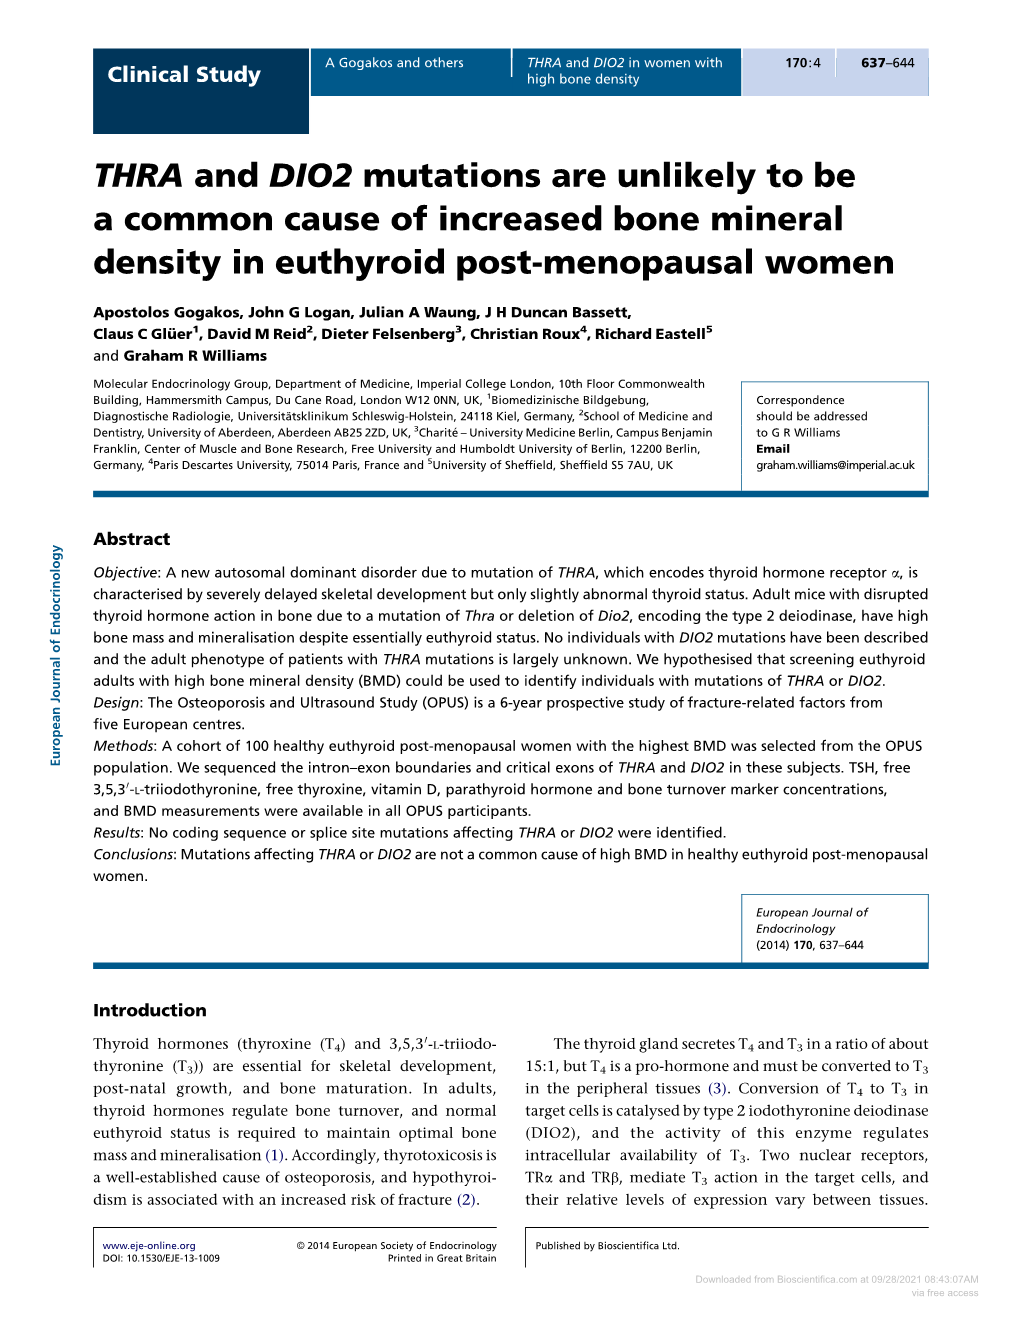 THRA and DIO2 Mutations Are Unlikely to Be a Common Cause of Increased Bone Mineral Density in Euthyroid Post-Menopausal Women